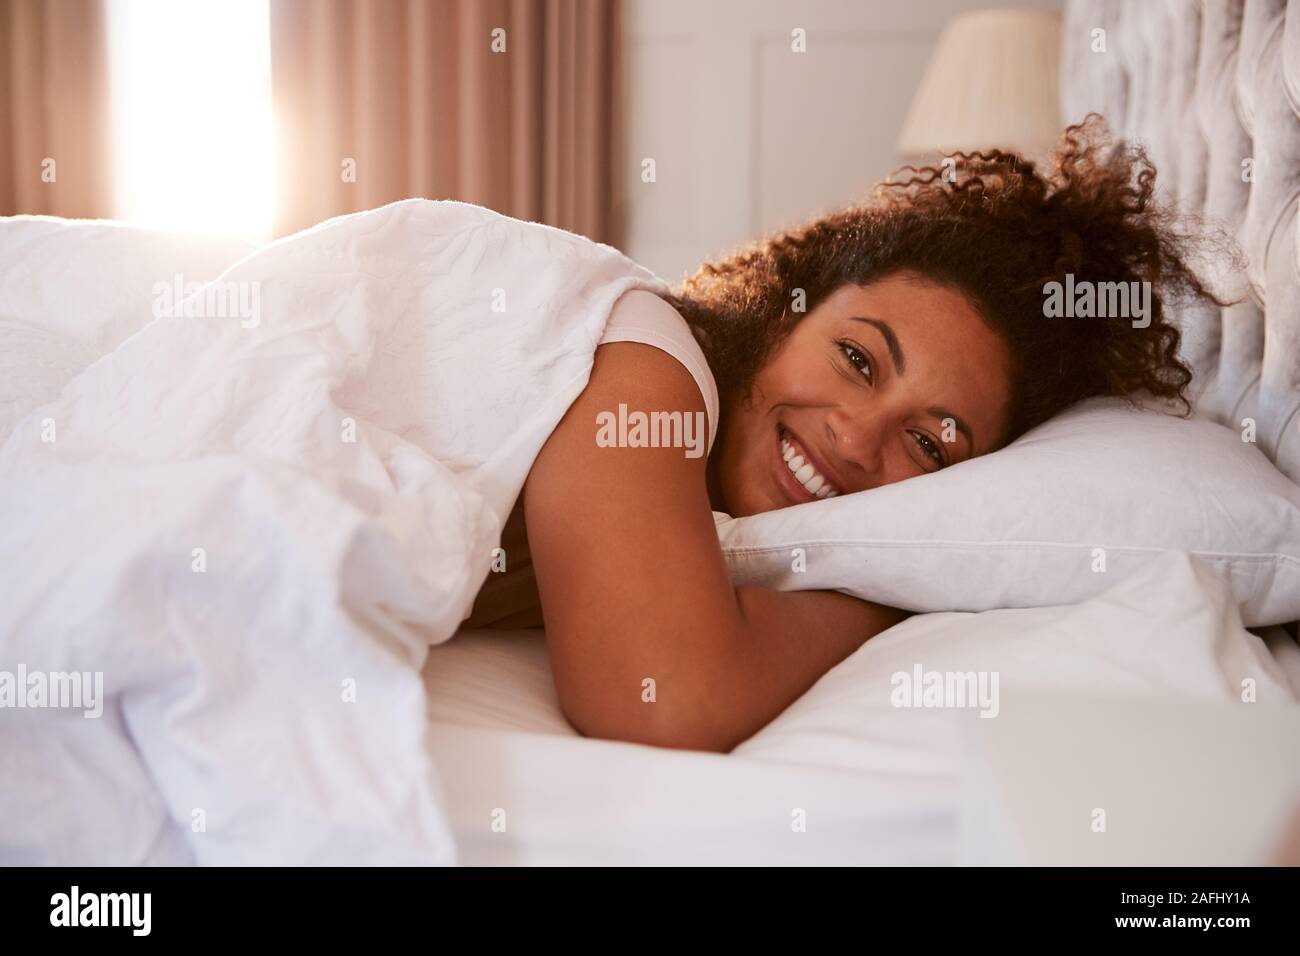 Portrait of Woman Waking Up In Bed And Smiling at Camera Banque D'Images